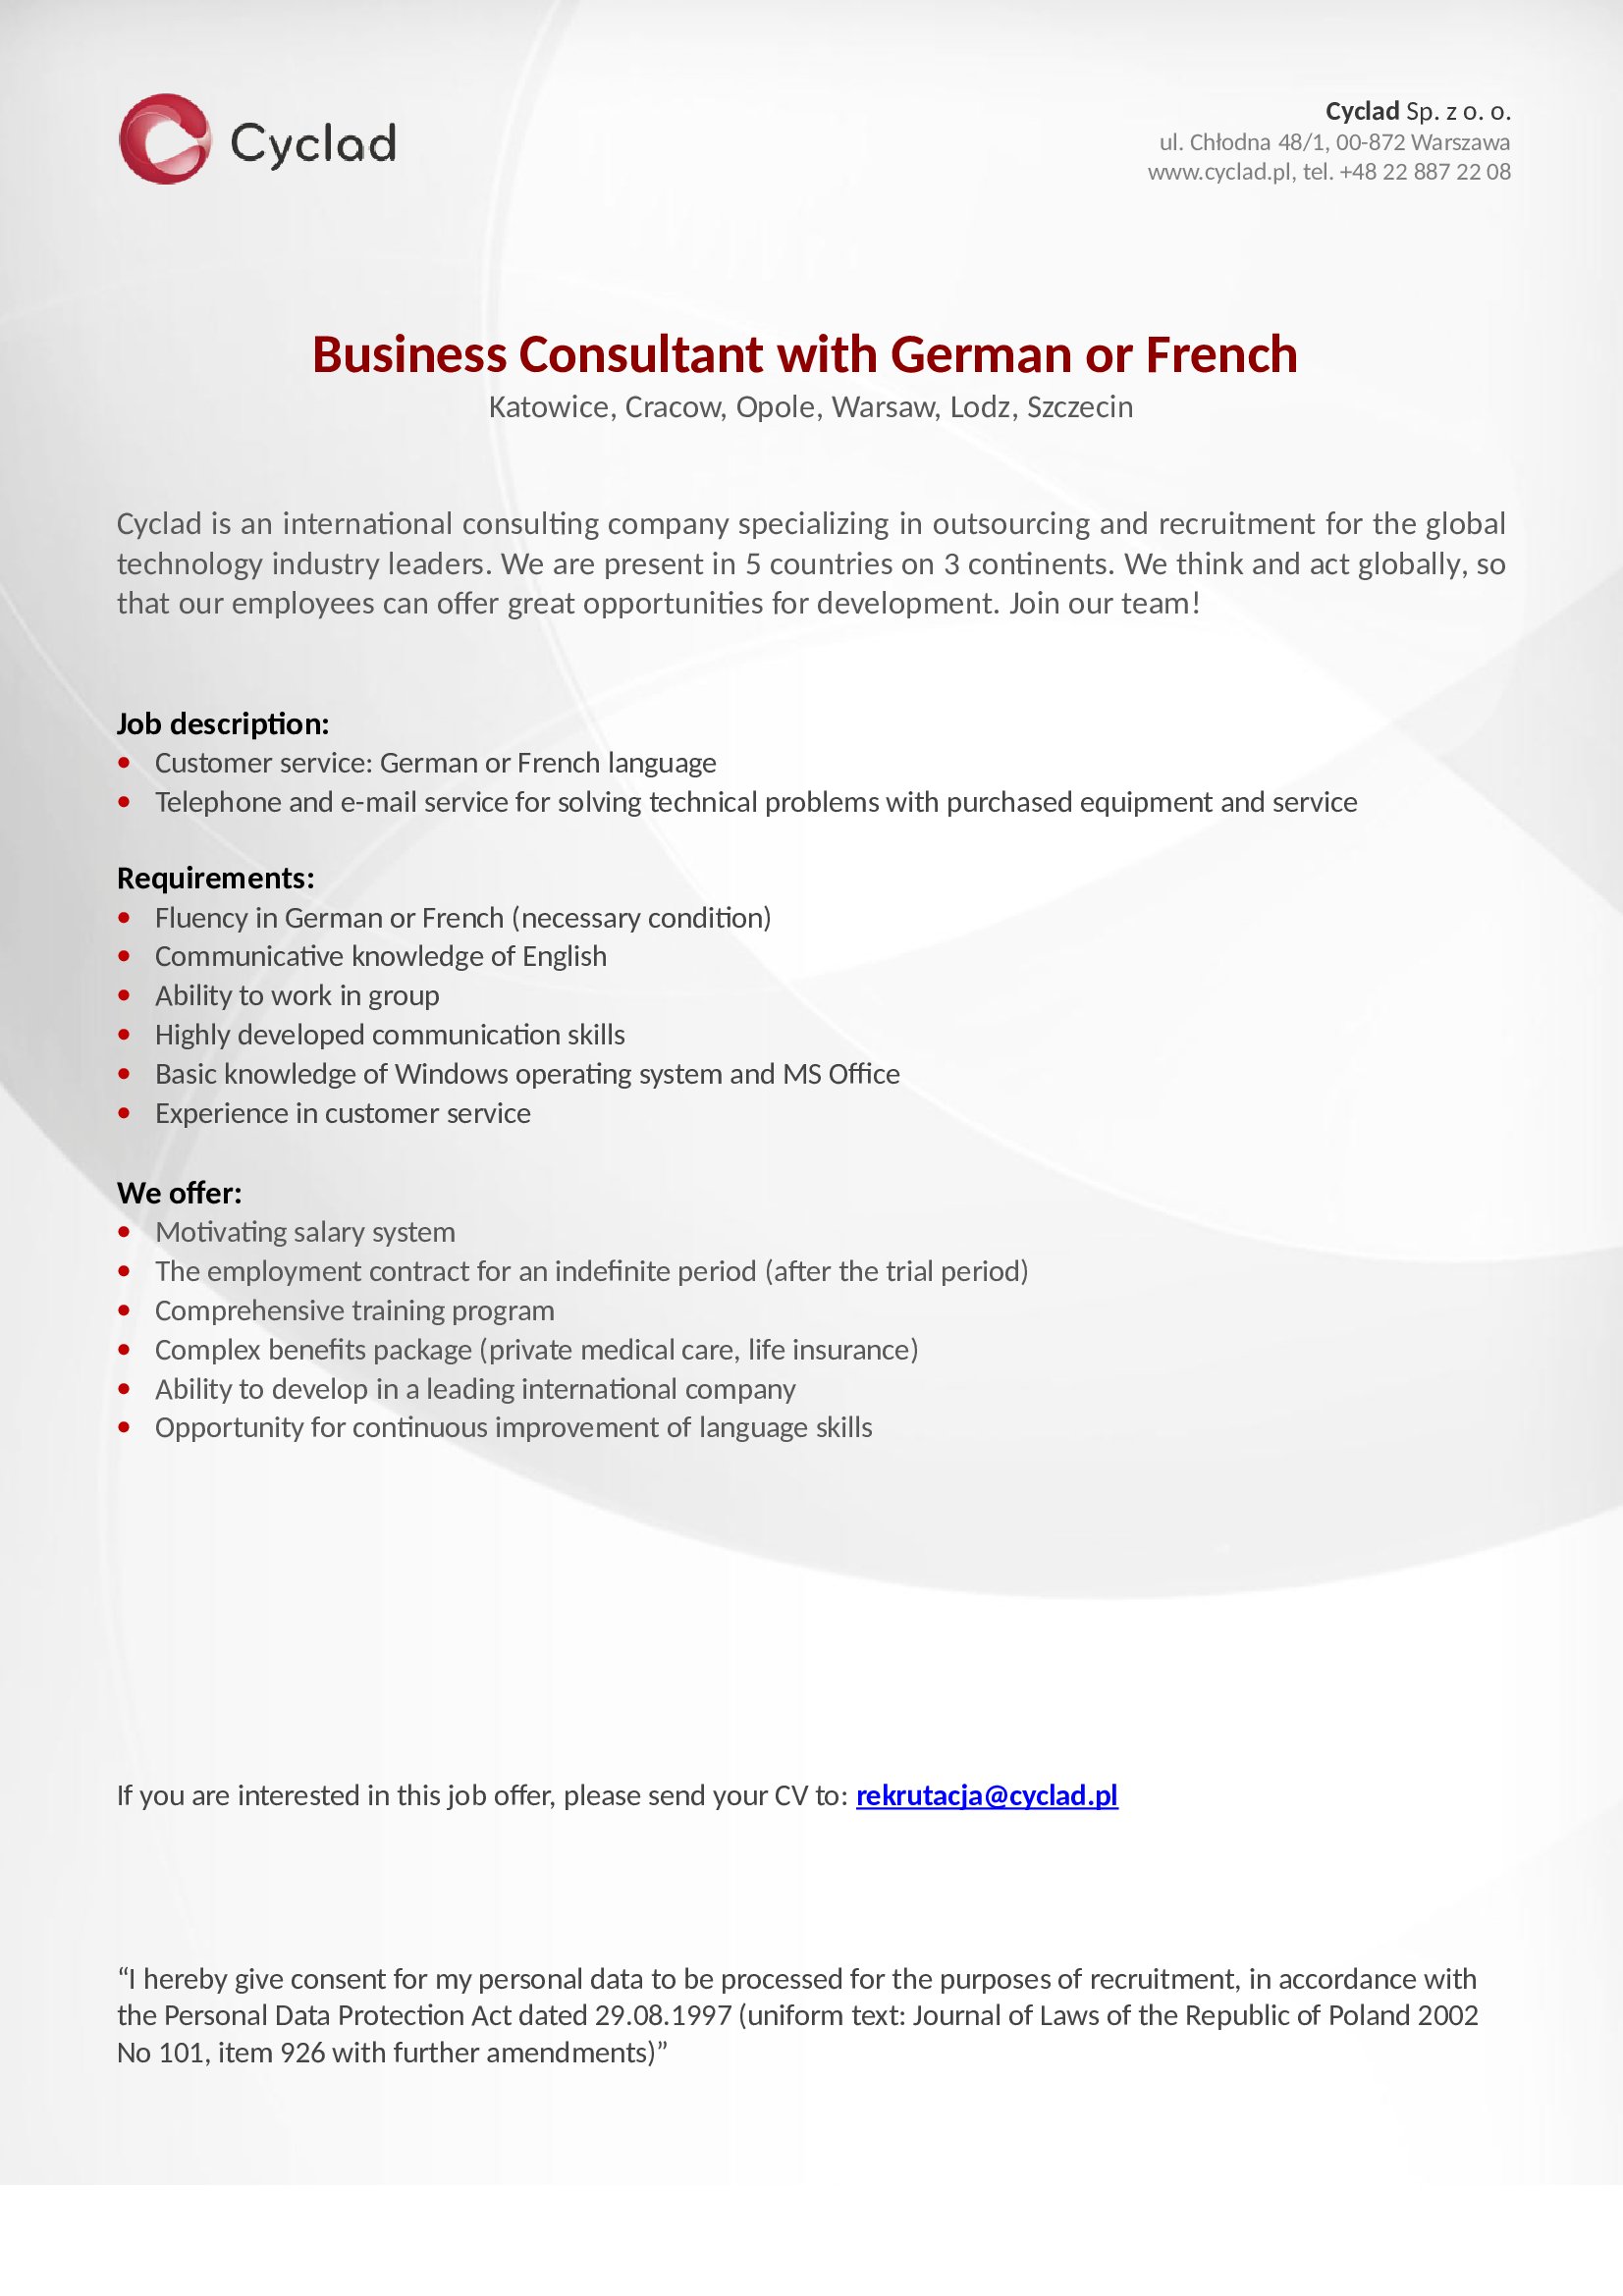 CYCLAD_Business_Consultant_with_German_or_French